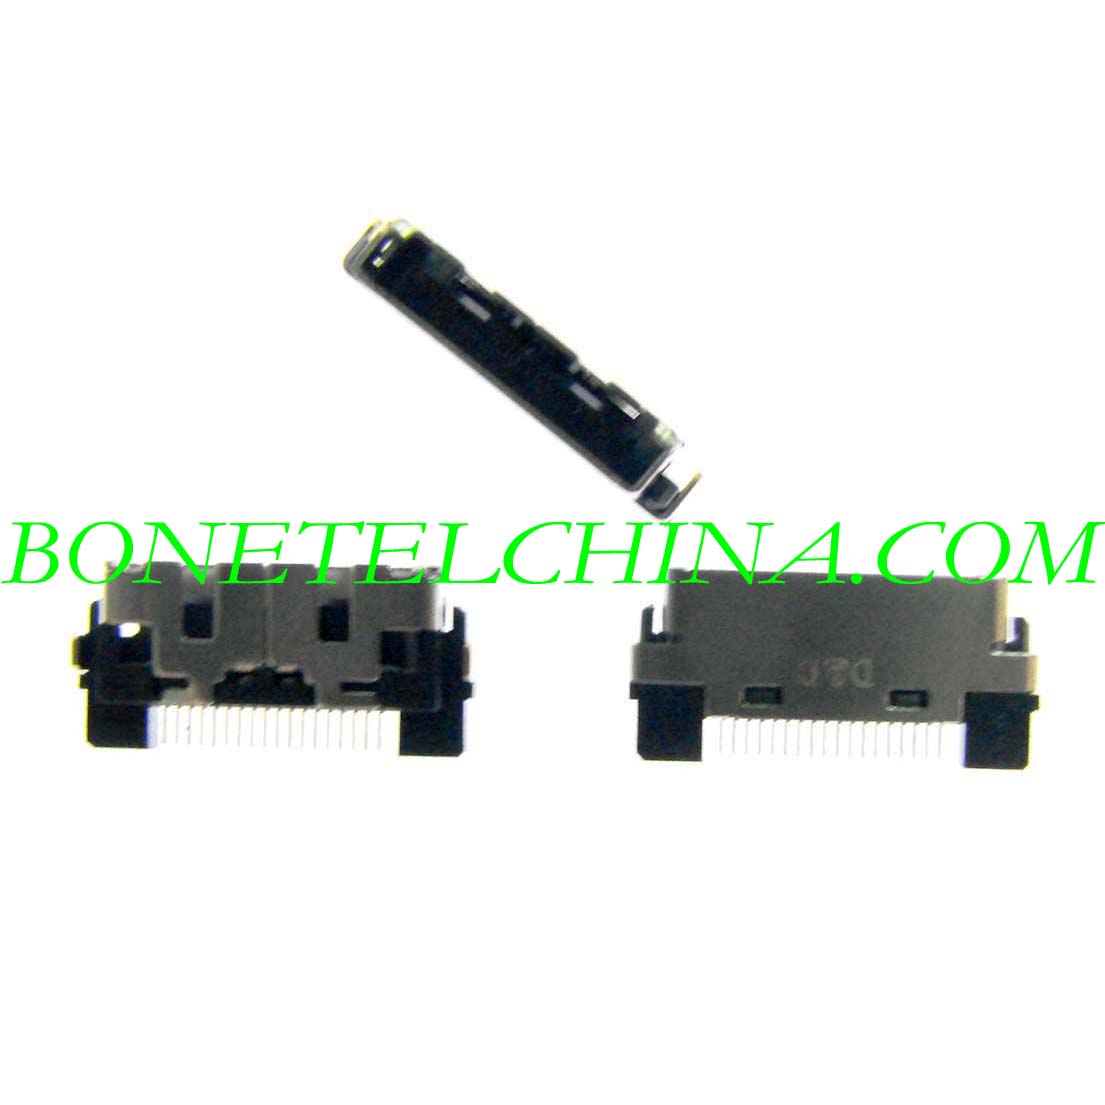 Charger Connector for Samsung E330